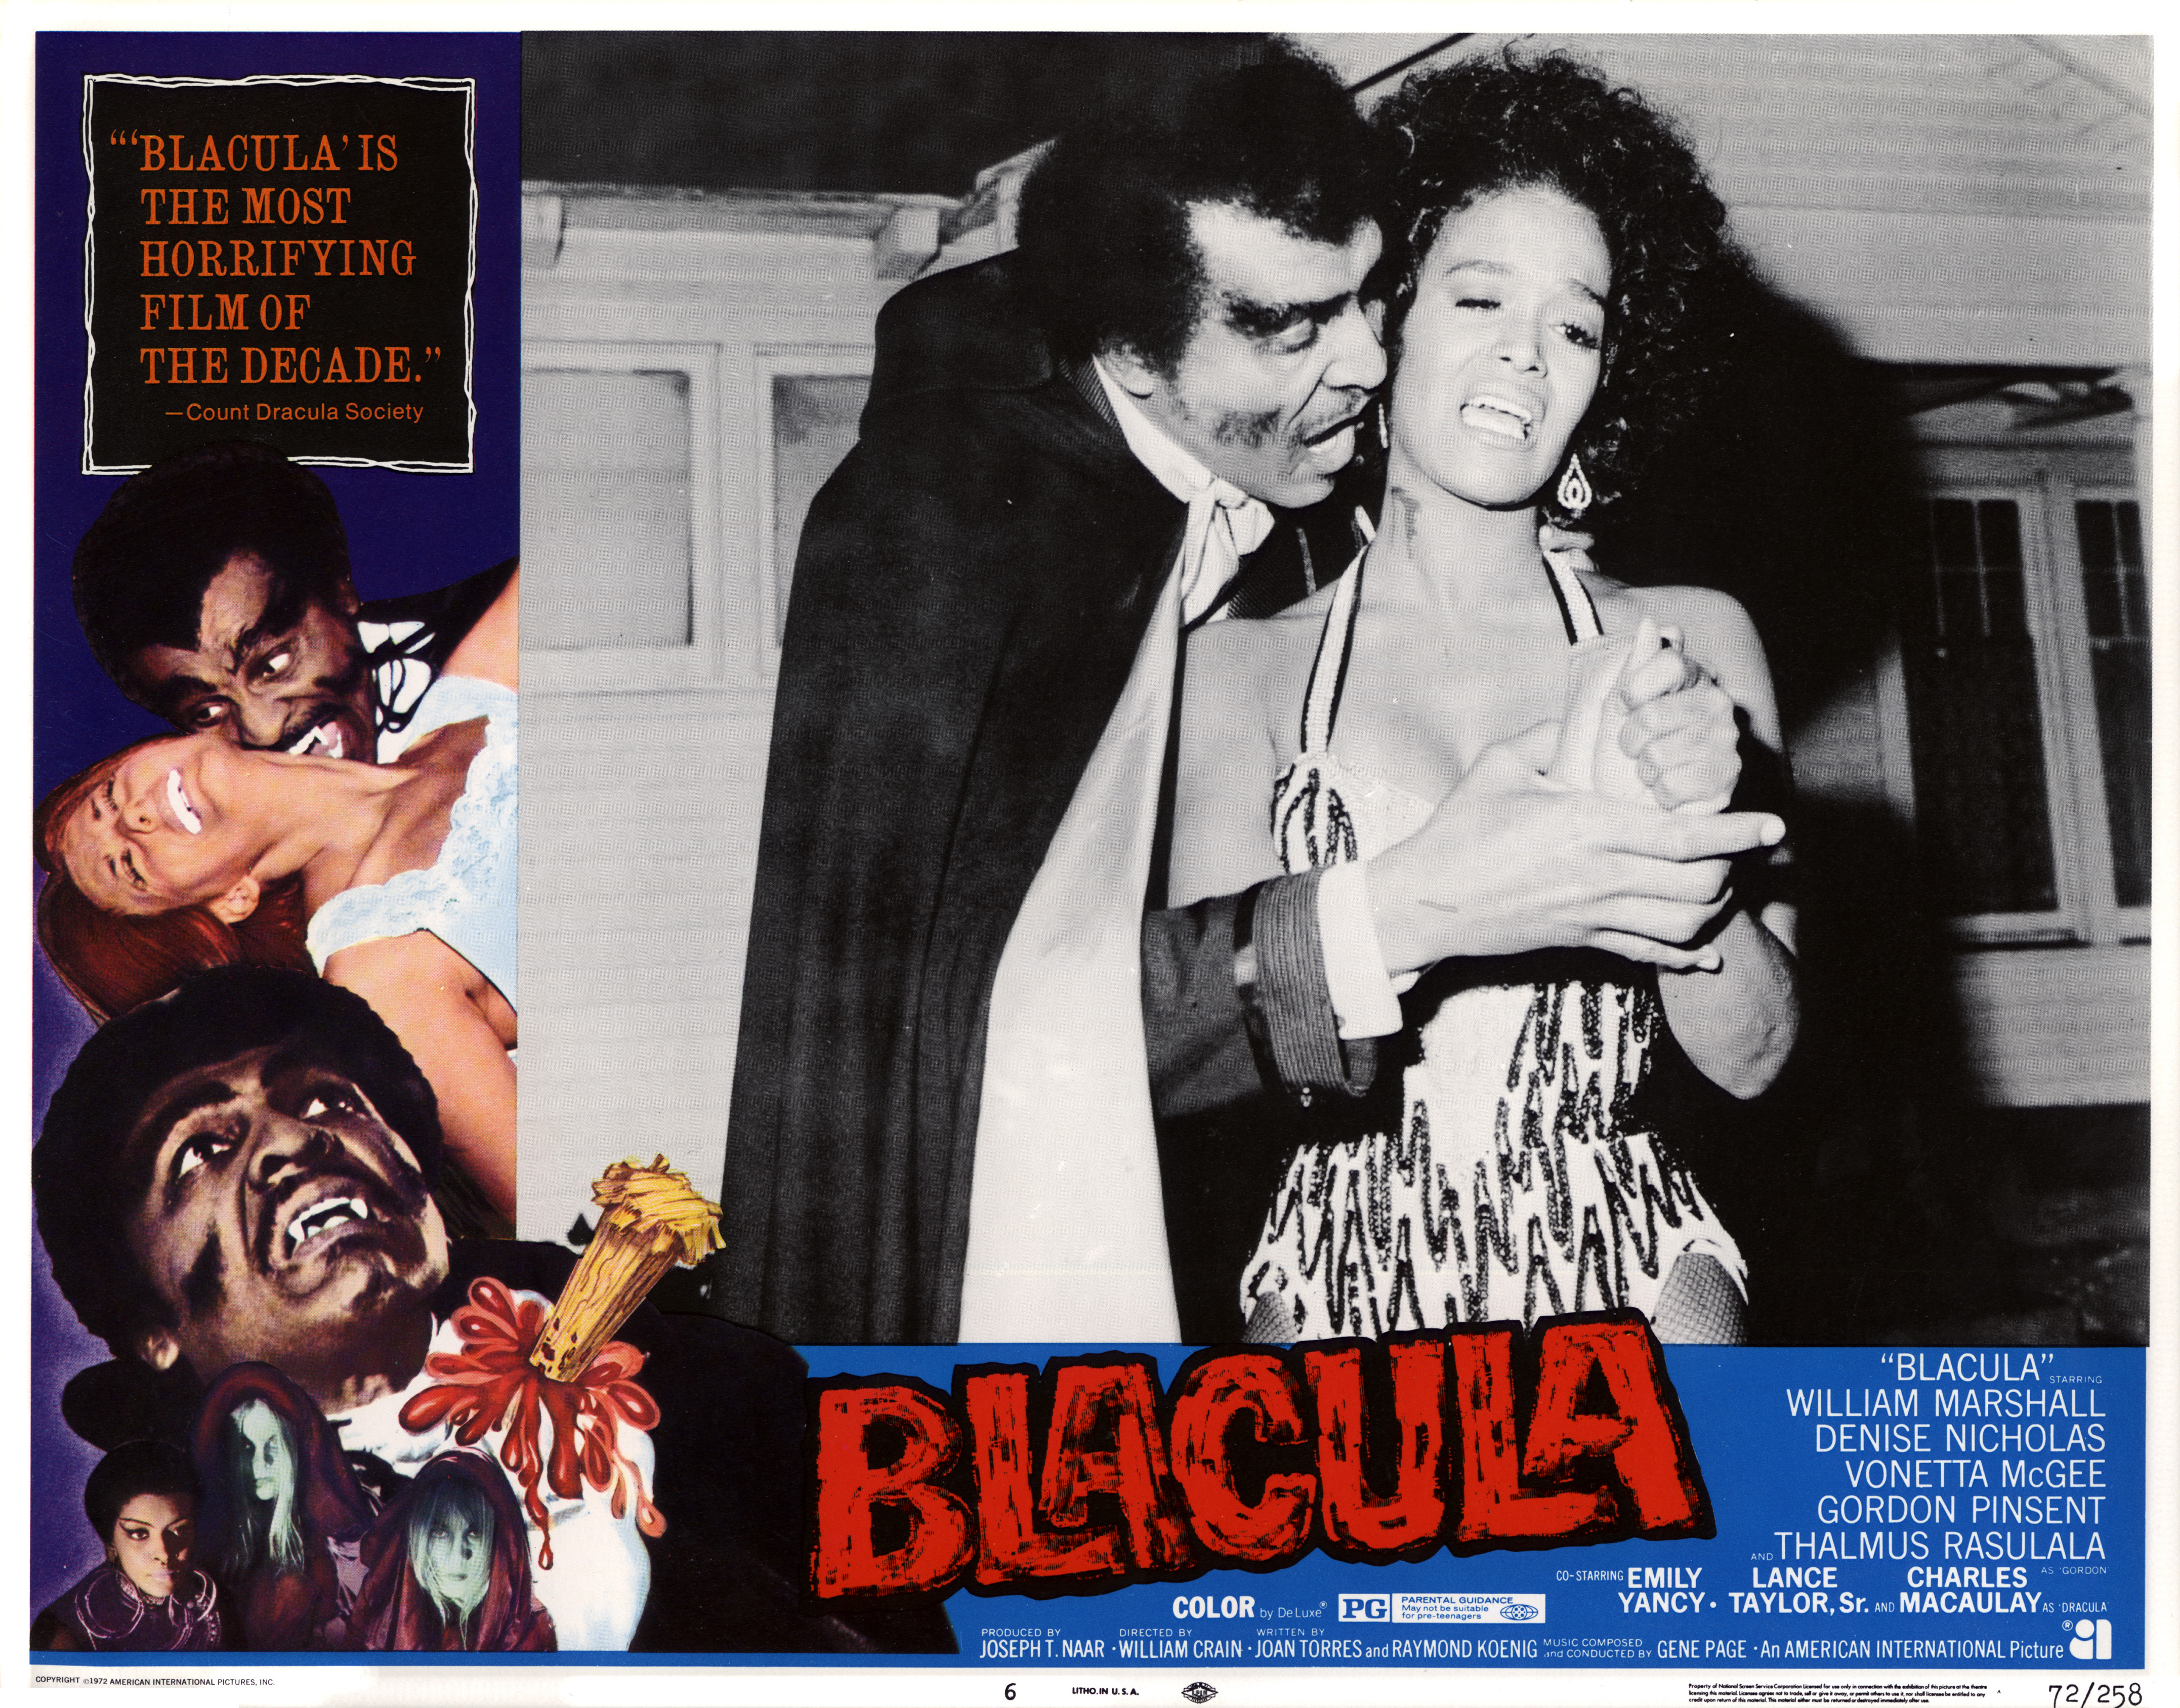 This is a photo of the lobby card for Blacula.